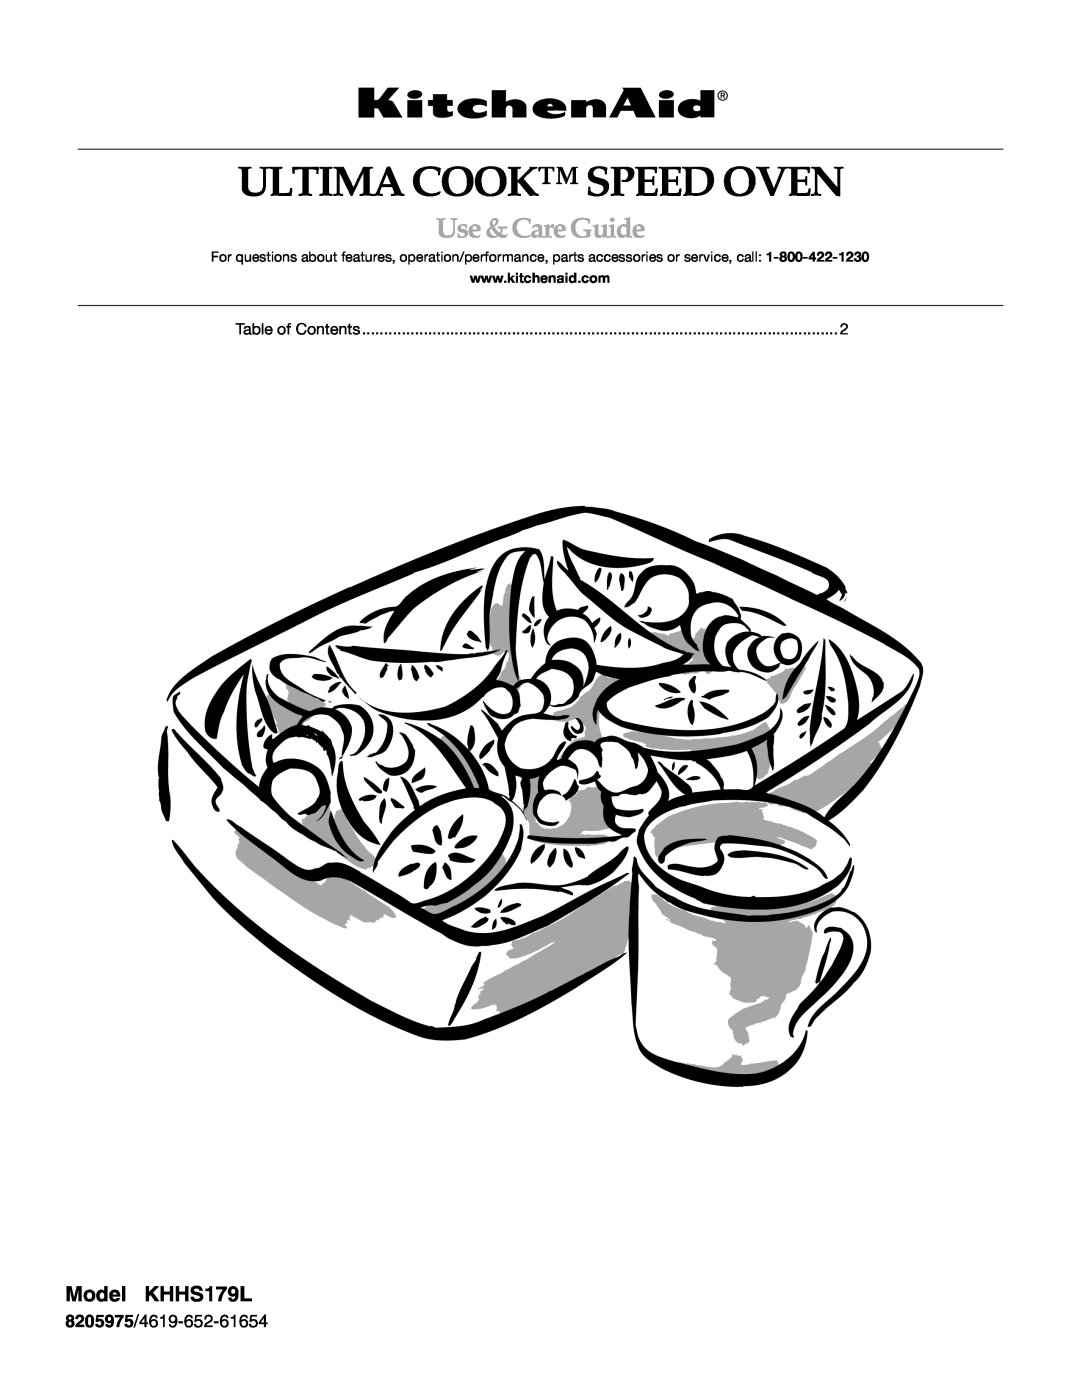 KitchenAid COOK SPEED OVEN manual Ultima Cook Speed Oven, Use & Care Guide, Model KHHS179L 